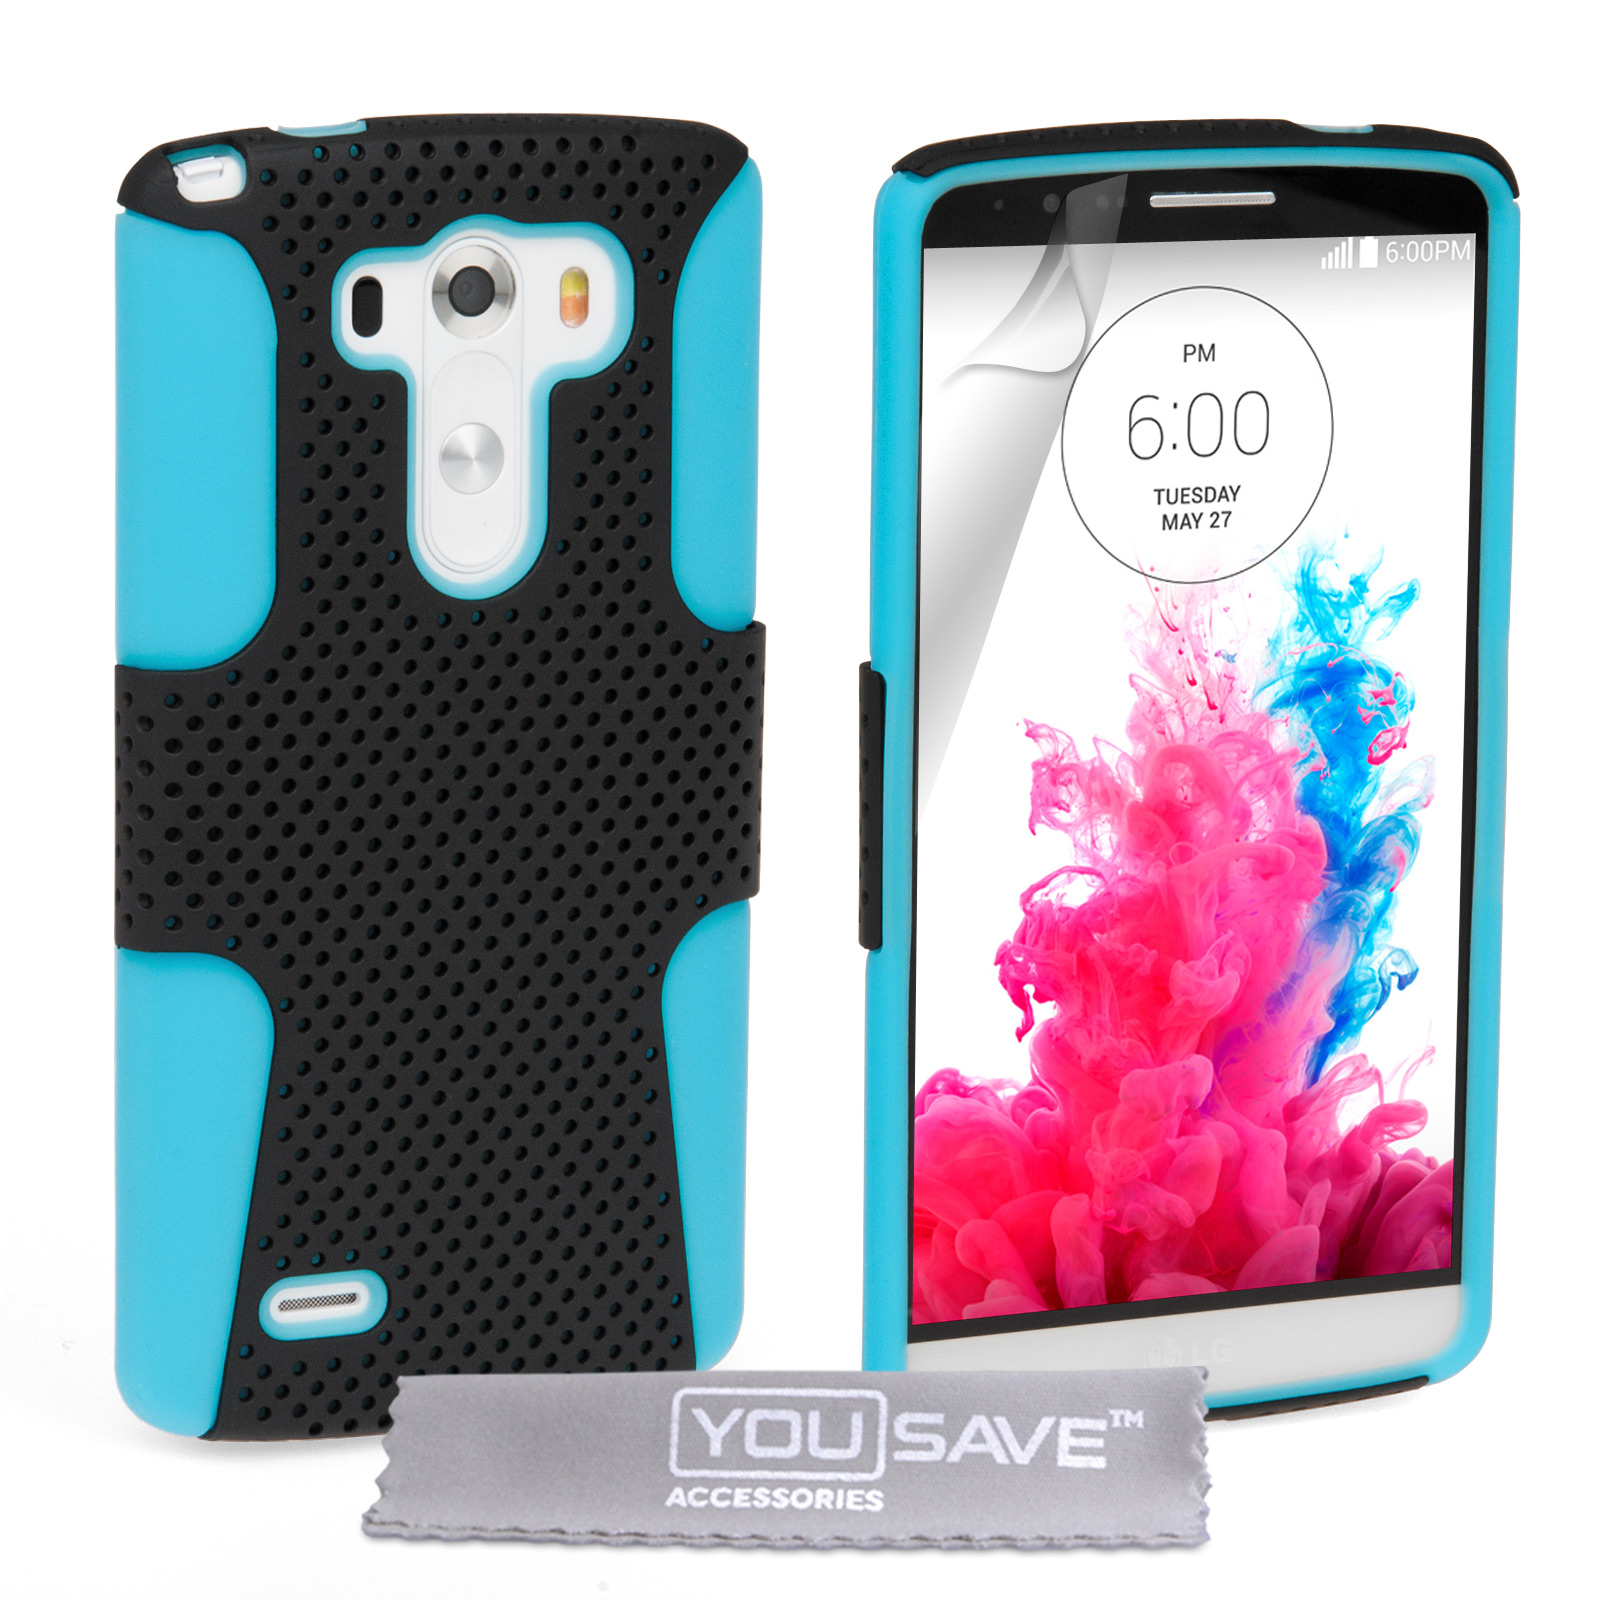 YouSave Accessories LG G3 Tough Mesh Combo Silicone Case - Blue-Black